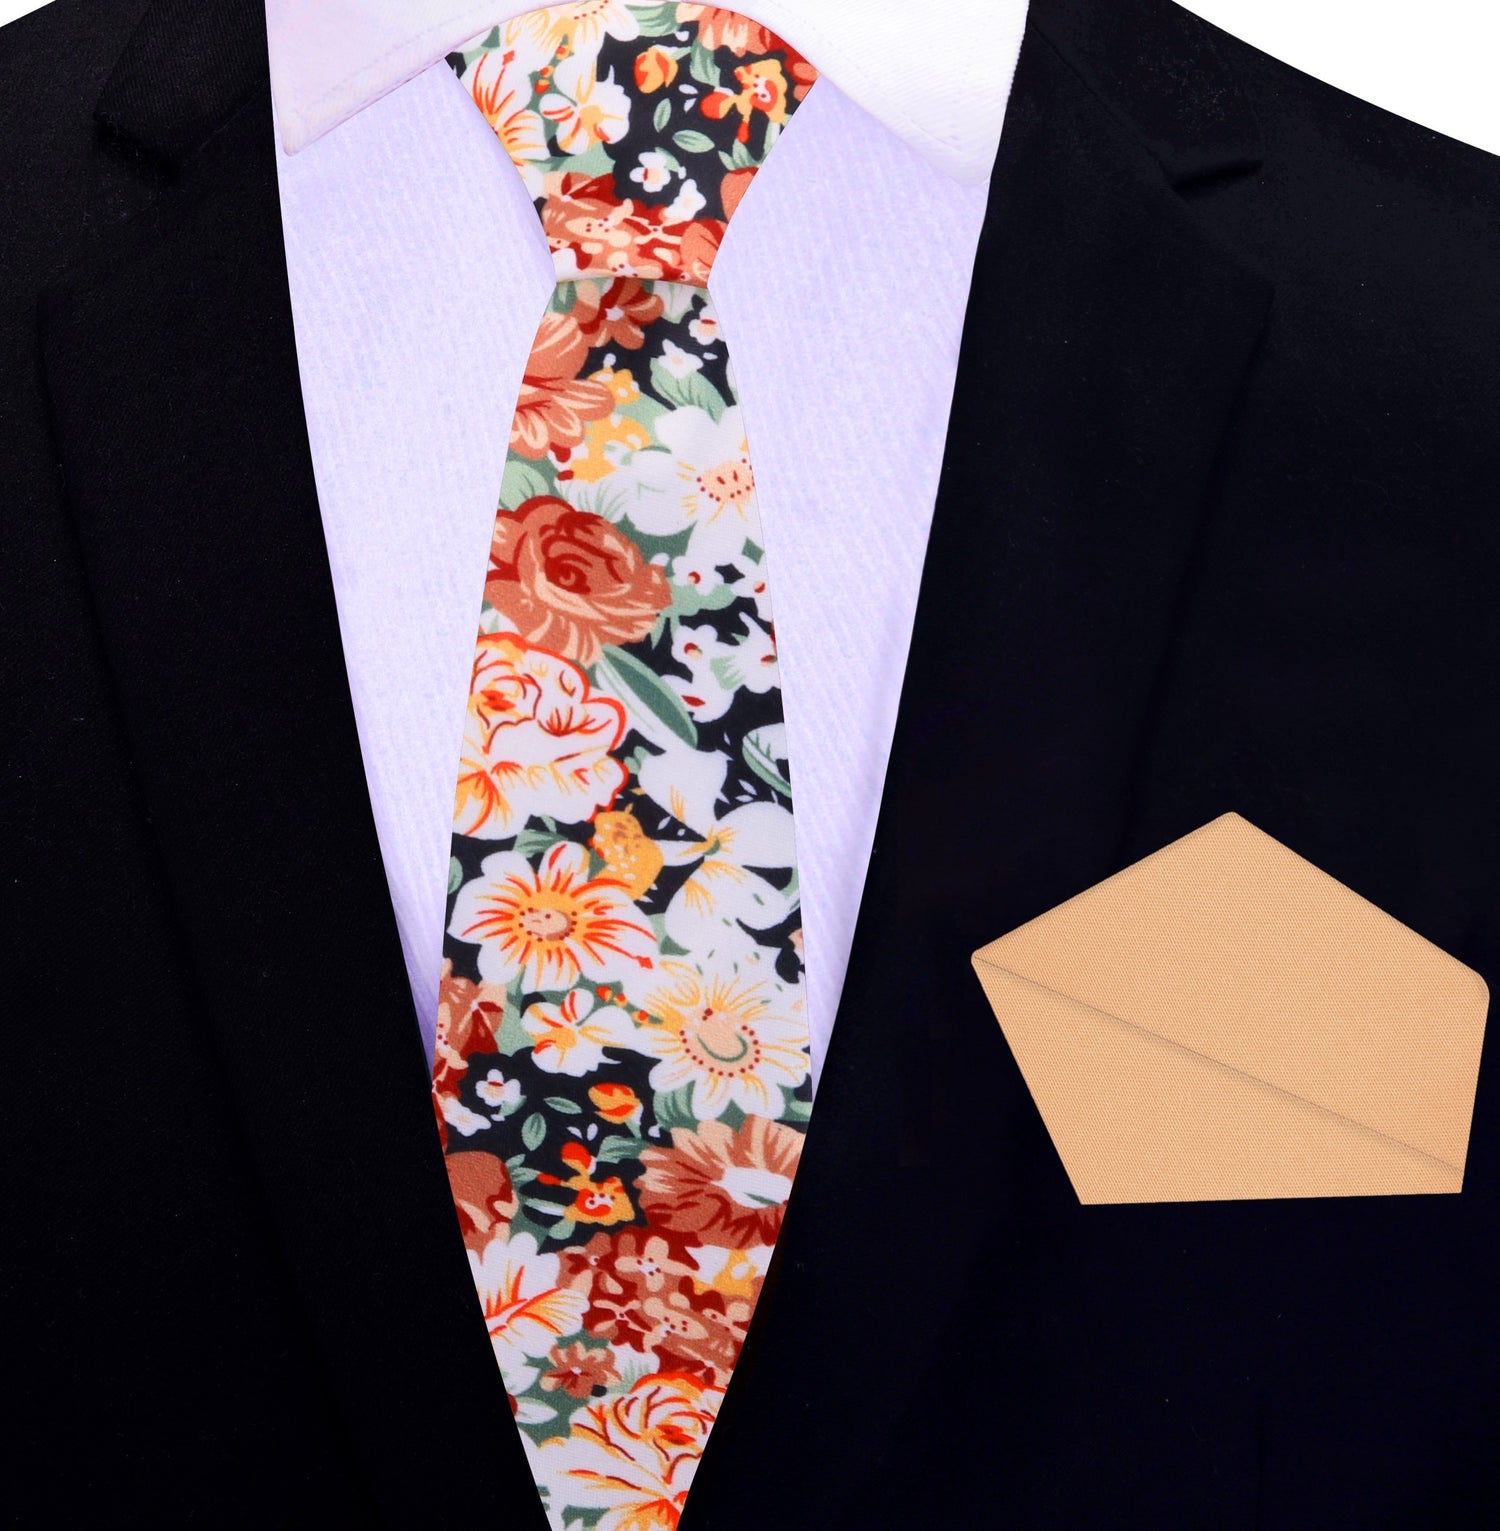 Thin Tie: Brown, Orange, White, Green Sketched Flowers Tie and Light Orange Square